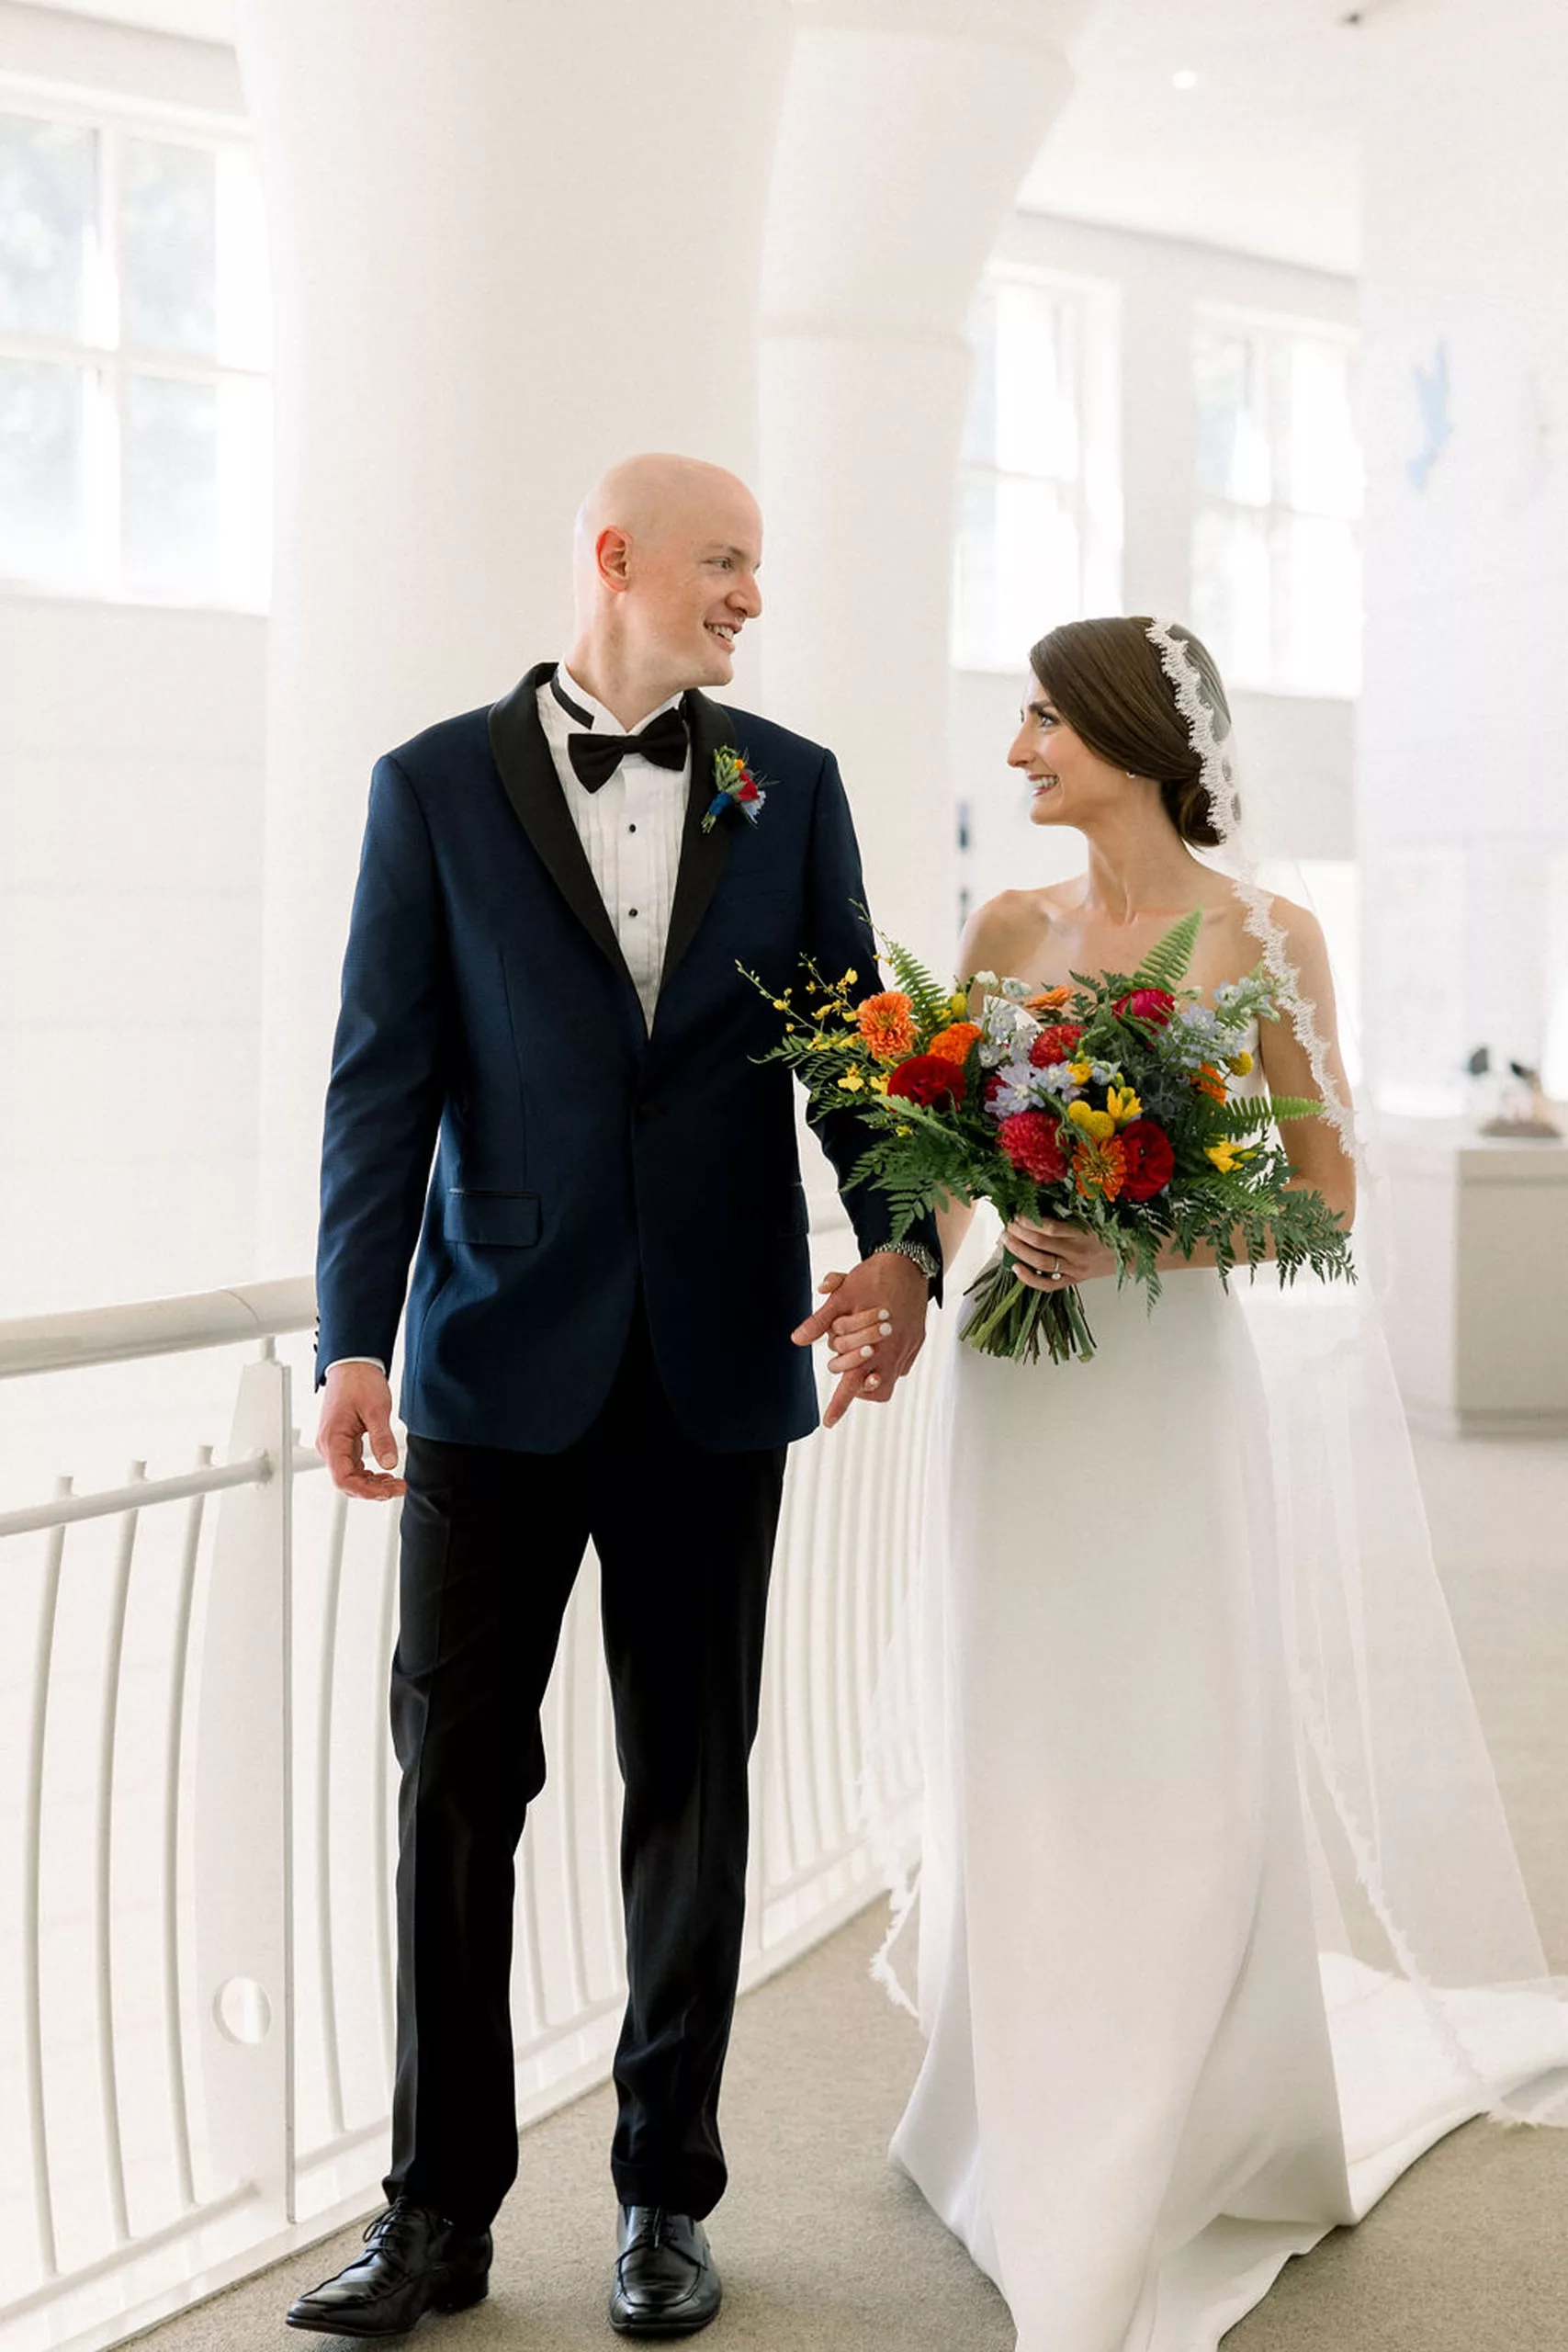 NEwlyweds walk hand in hand while looking at each other through a museum lobby by a railing